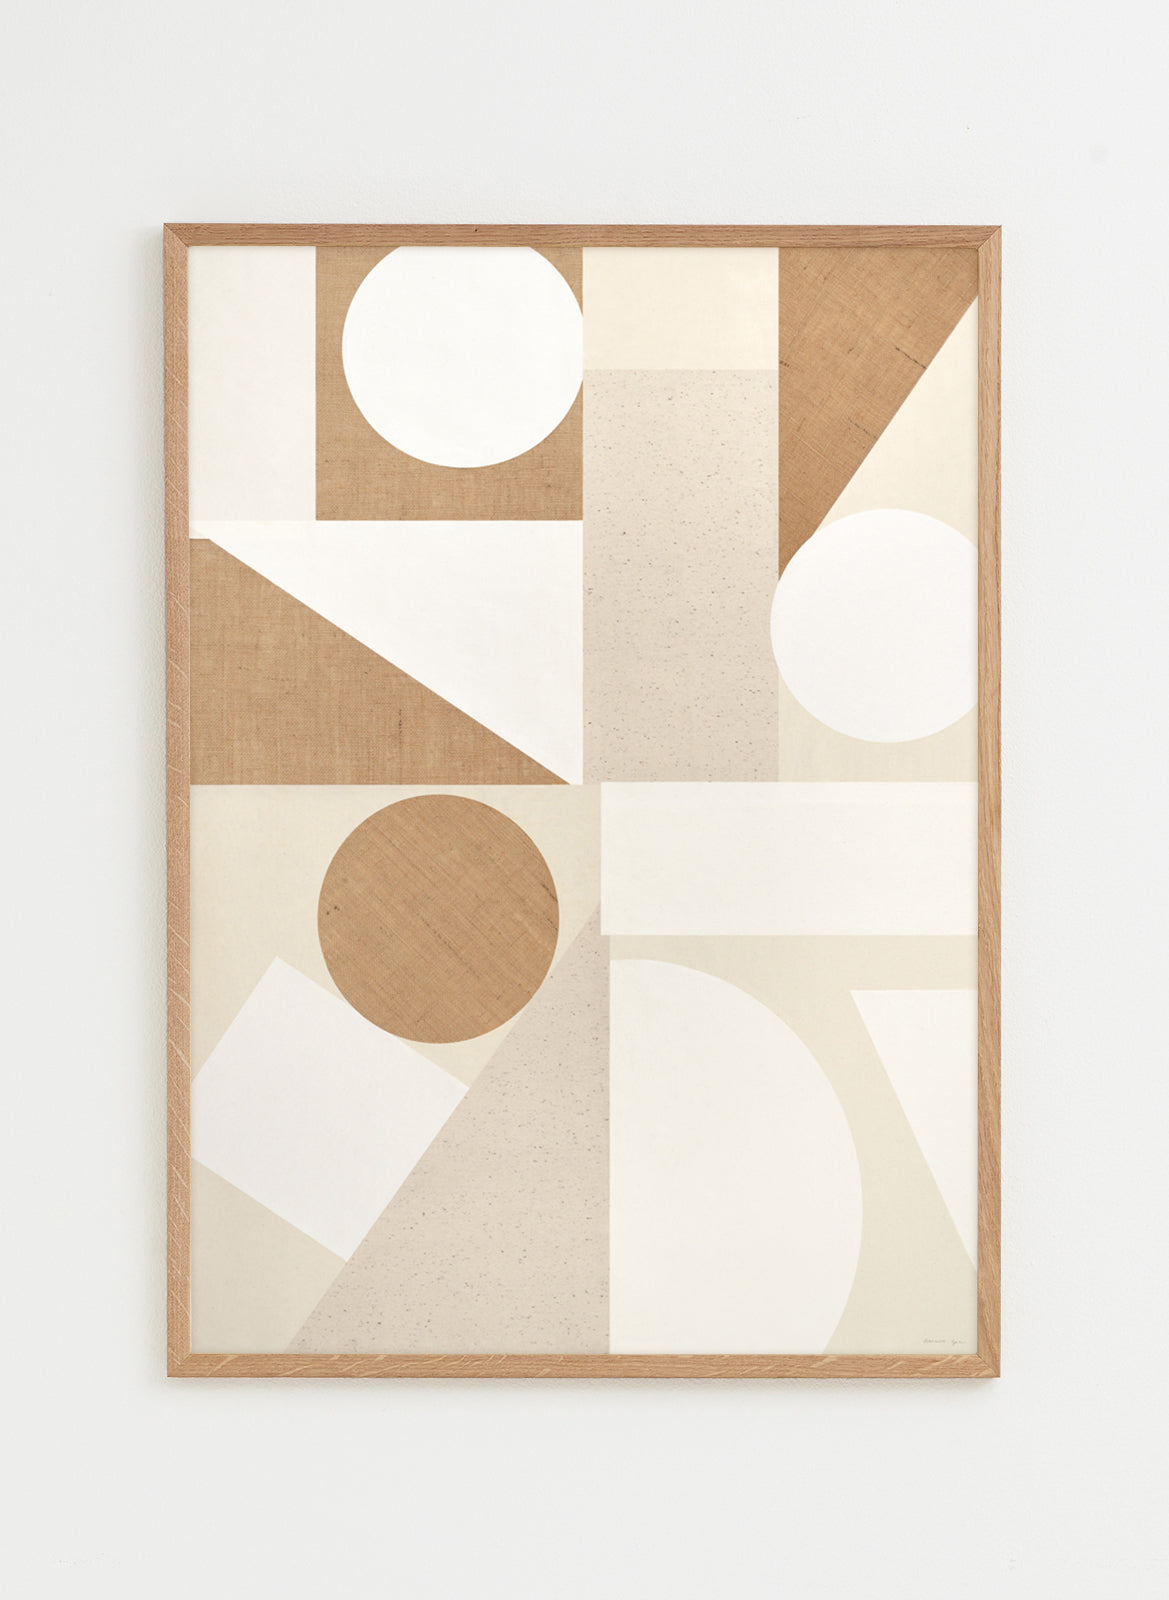 Geometrical poster made by atelier cph